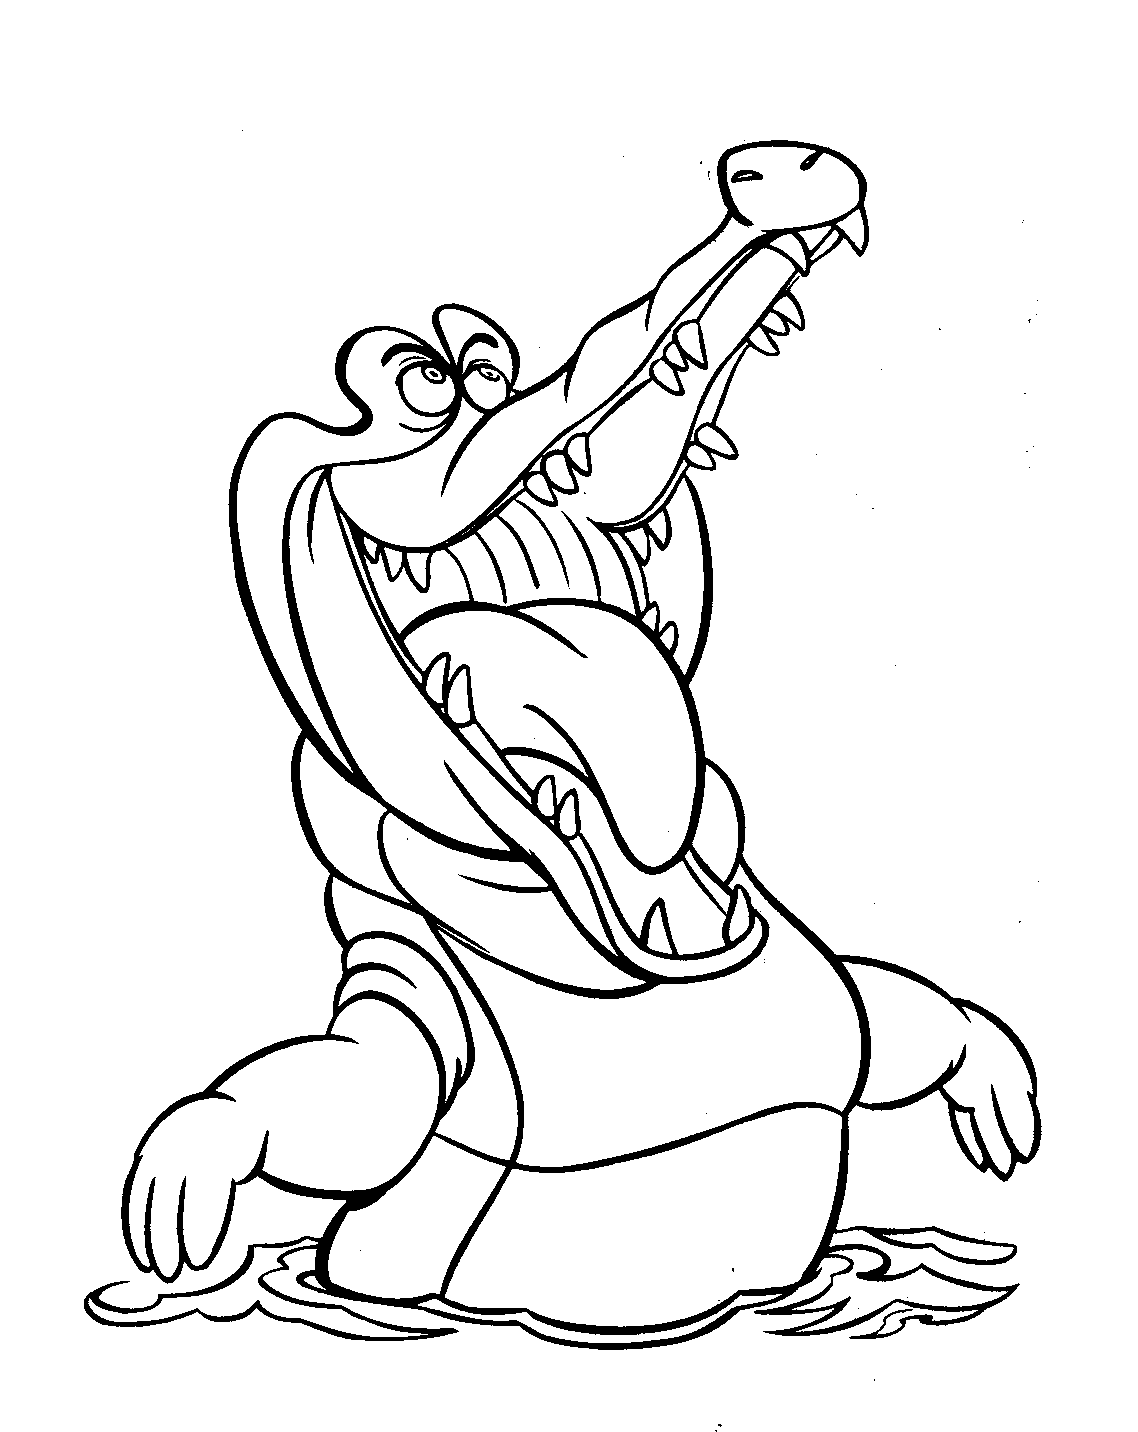 Simple Peter Pan coloring page for kids